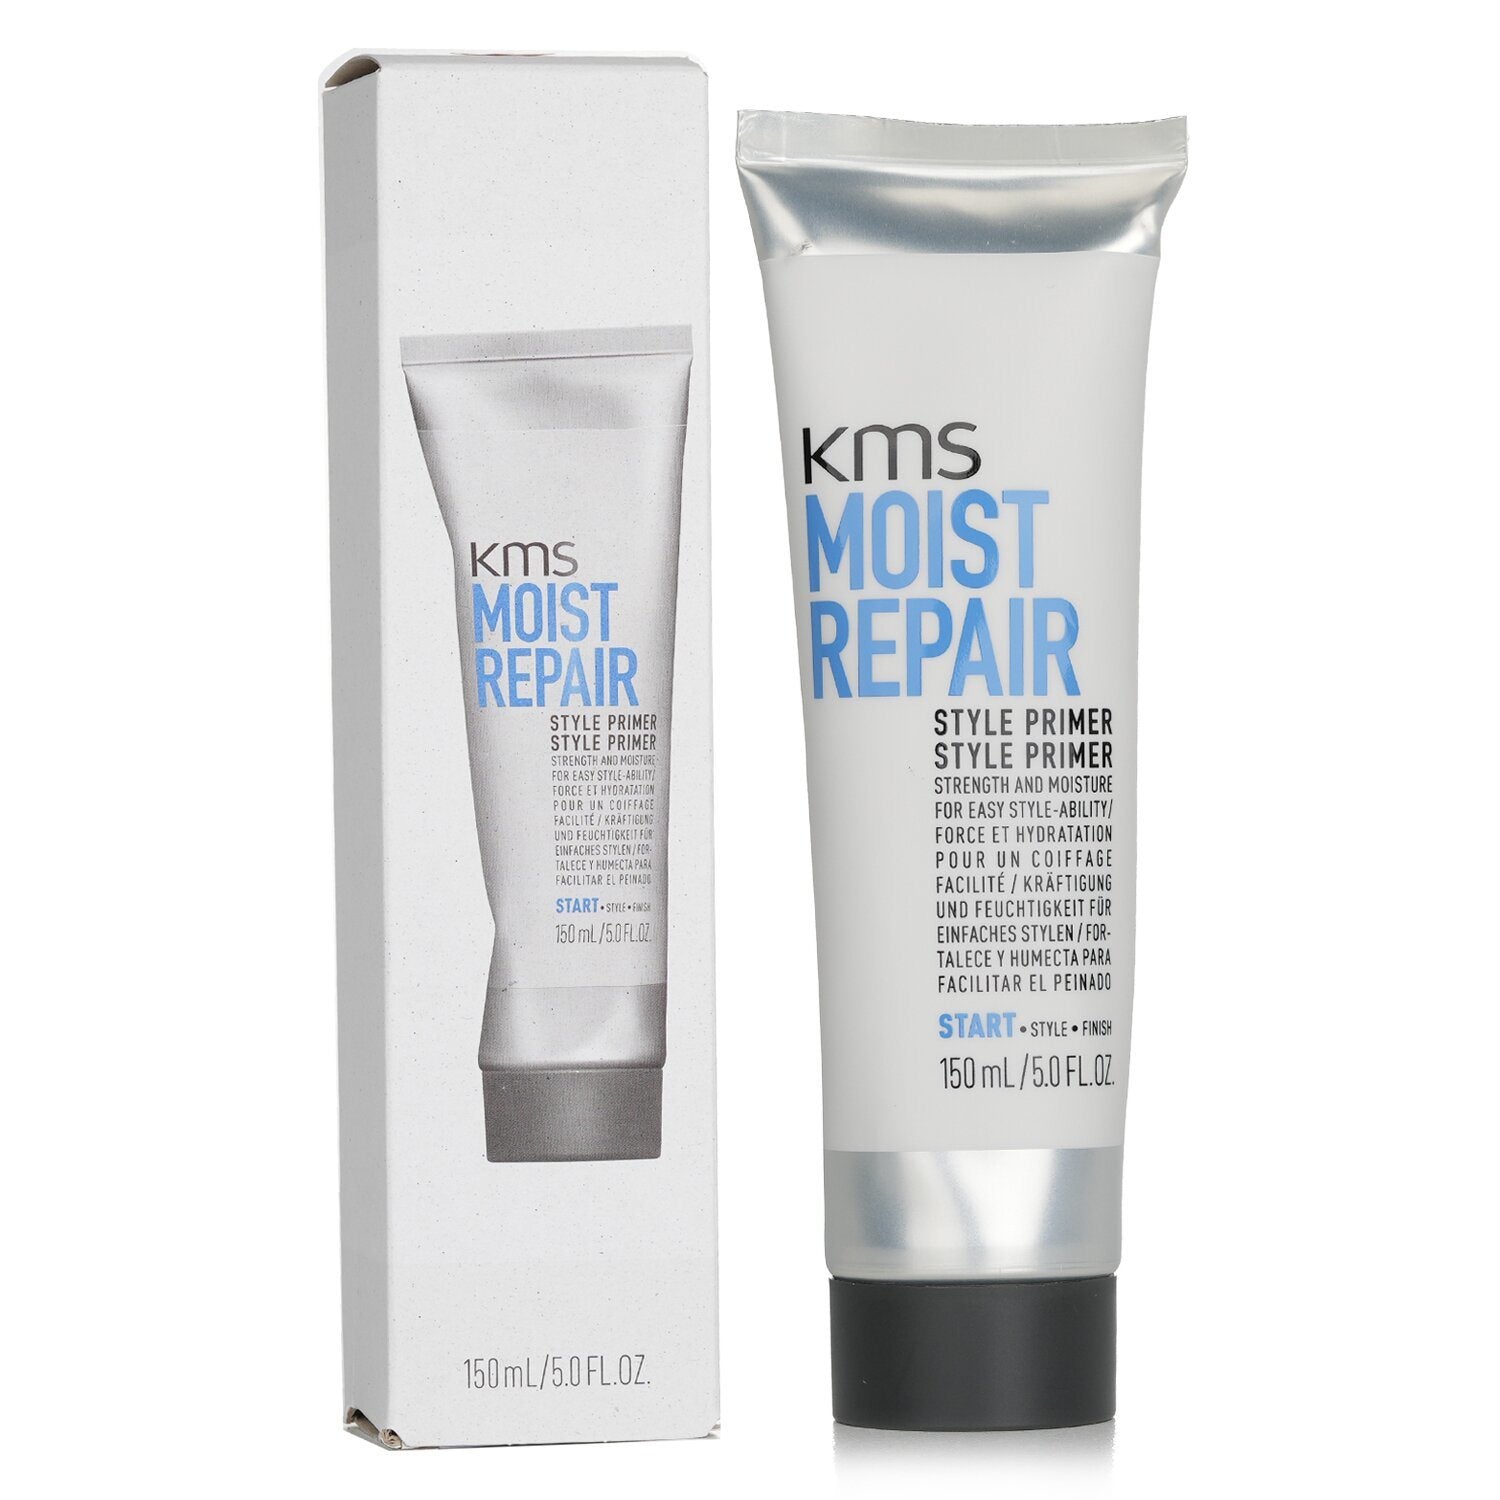 Moist Repair Style Primer (Strength and Moisture For Easy Style-Ability)